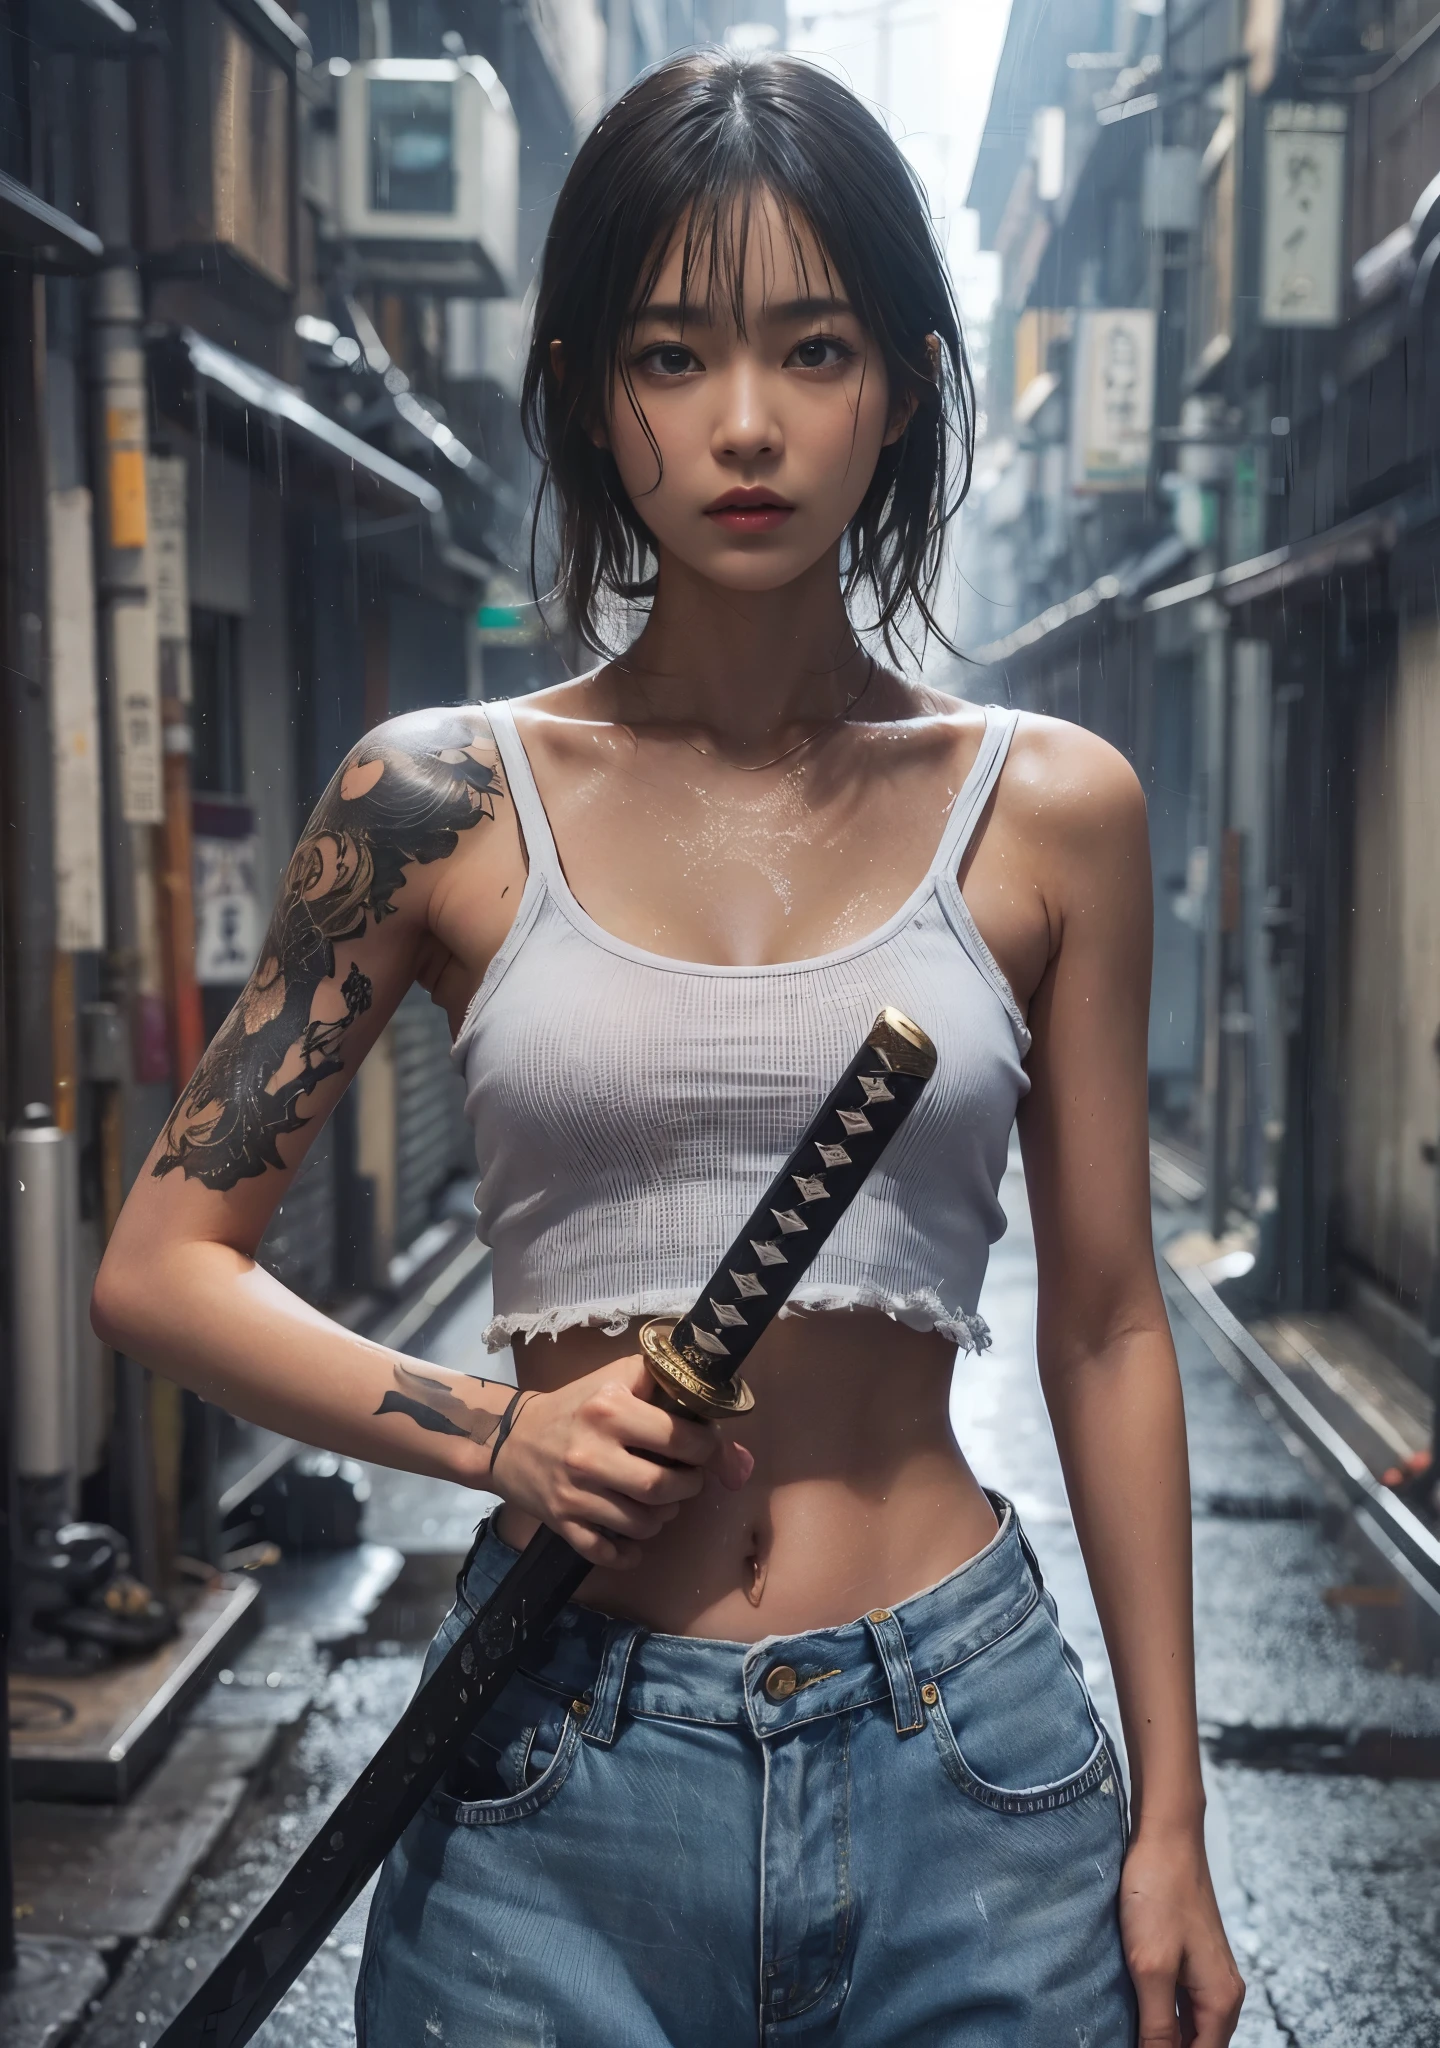 ８ｋ,Realistic Skin Texture、Superrealism、Realistic Photo、Japanese women、、Standing with a Japan sword、draw oneself up to one's full height.、The tip of the sword is pointed towards me、Tank top,Oversized jeans、sneakers、Shinjuku Back Alley、Innovative composition、Full body photo、、A wistful look、Tattoo、rain、soaked